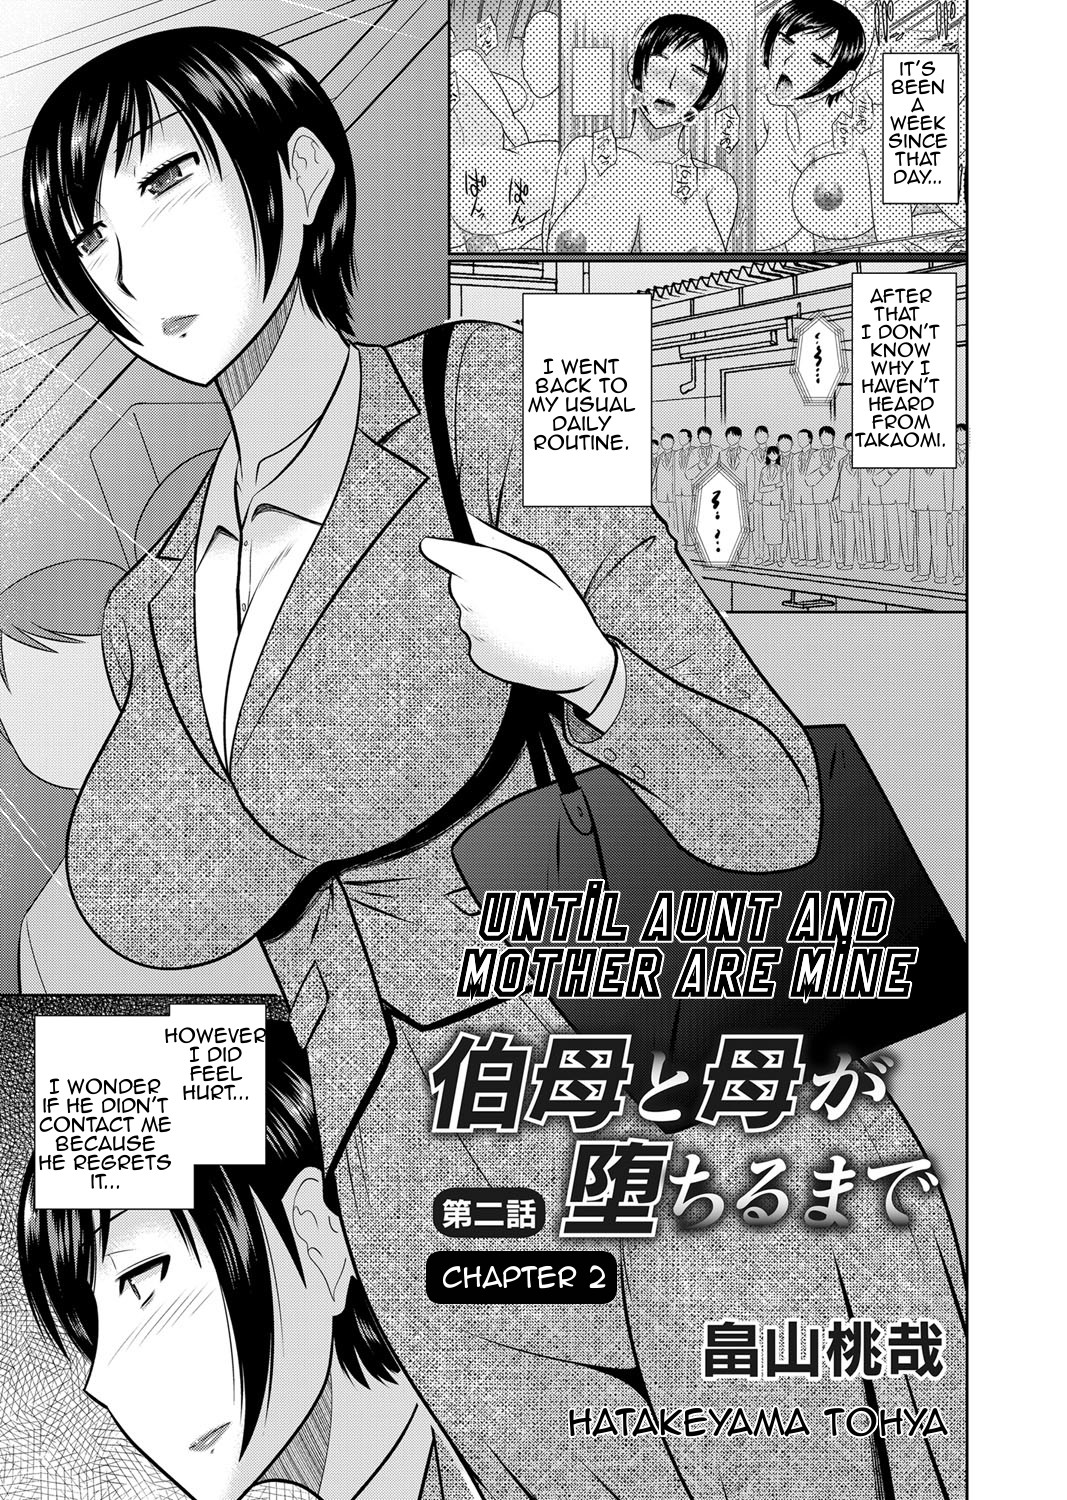 Hentai Manga Comic-Until Aunt and Mother Are Mine-Chapter 2-1